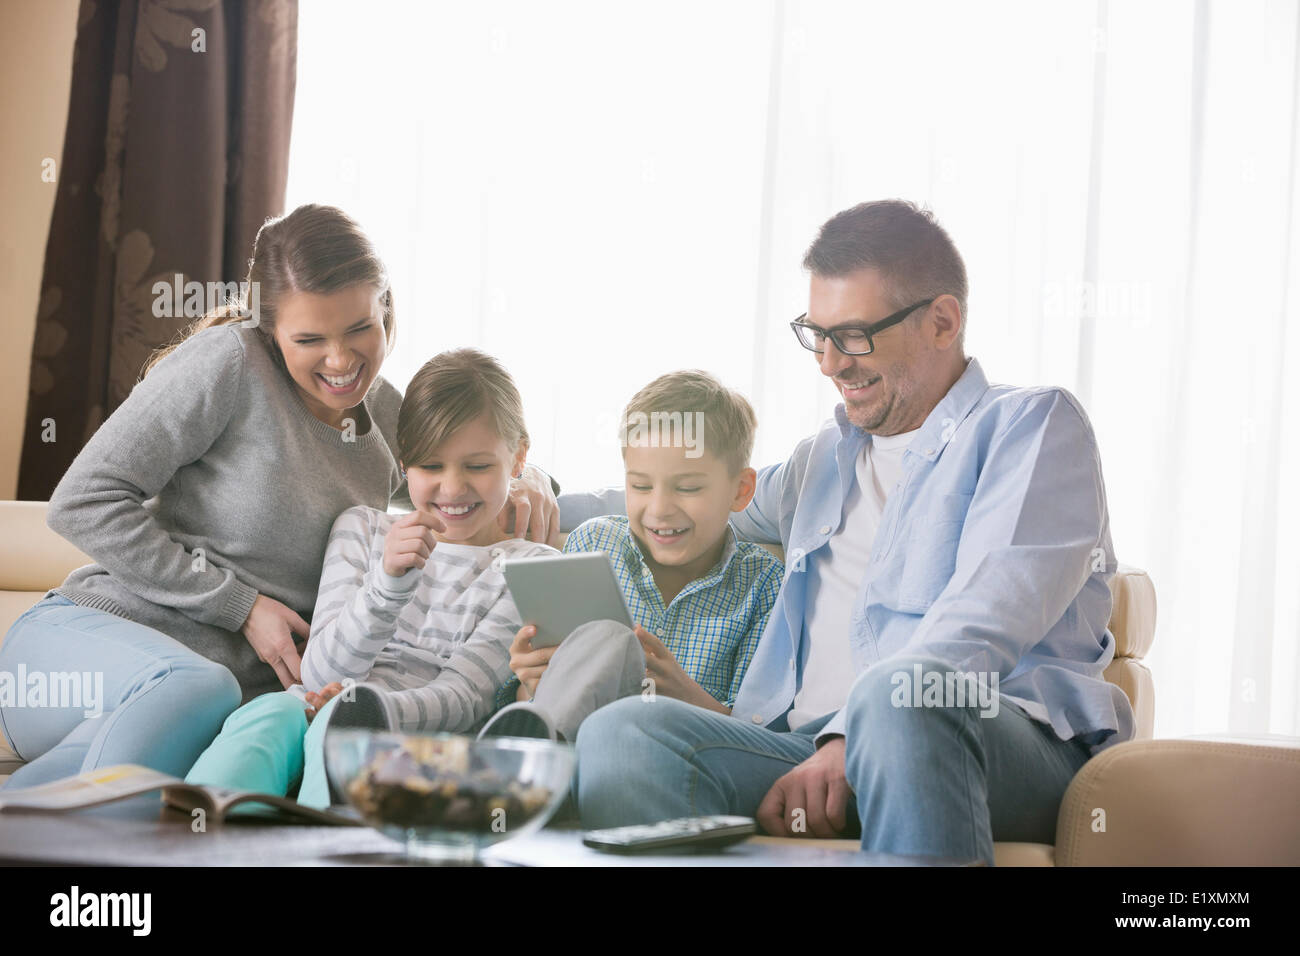 Happy Family using tablet PC in living room Banque D'Images